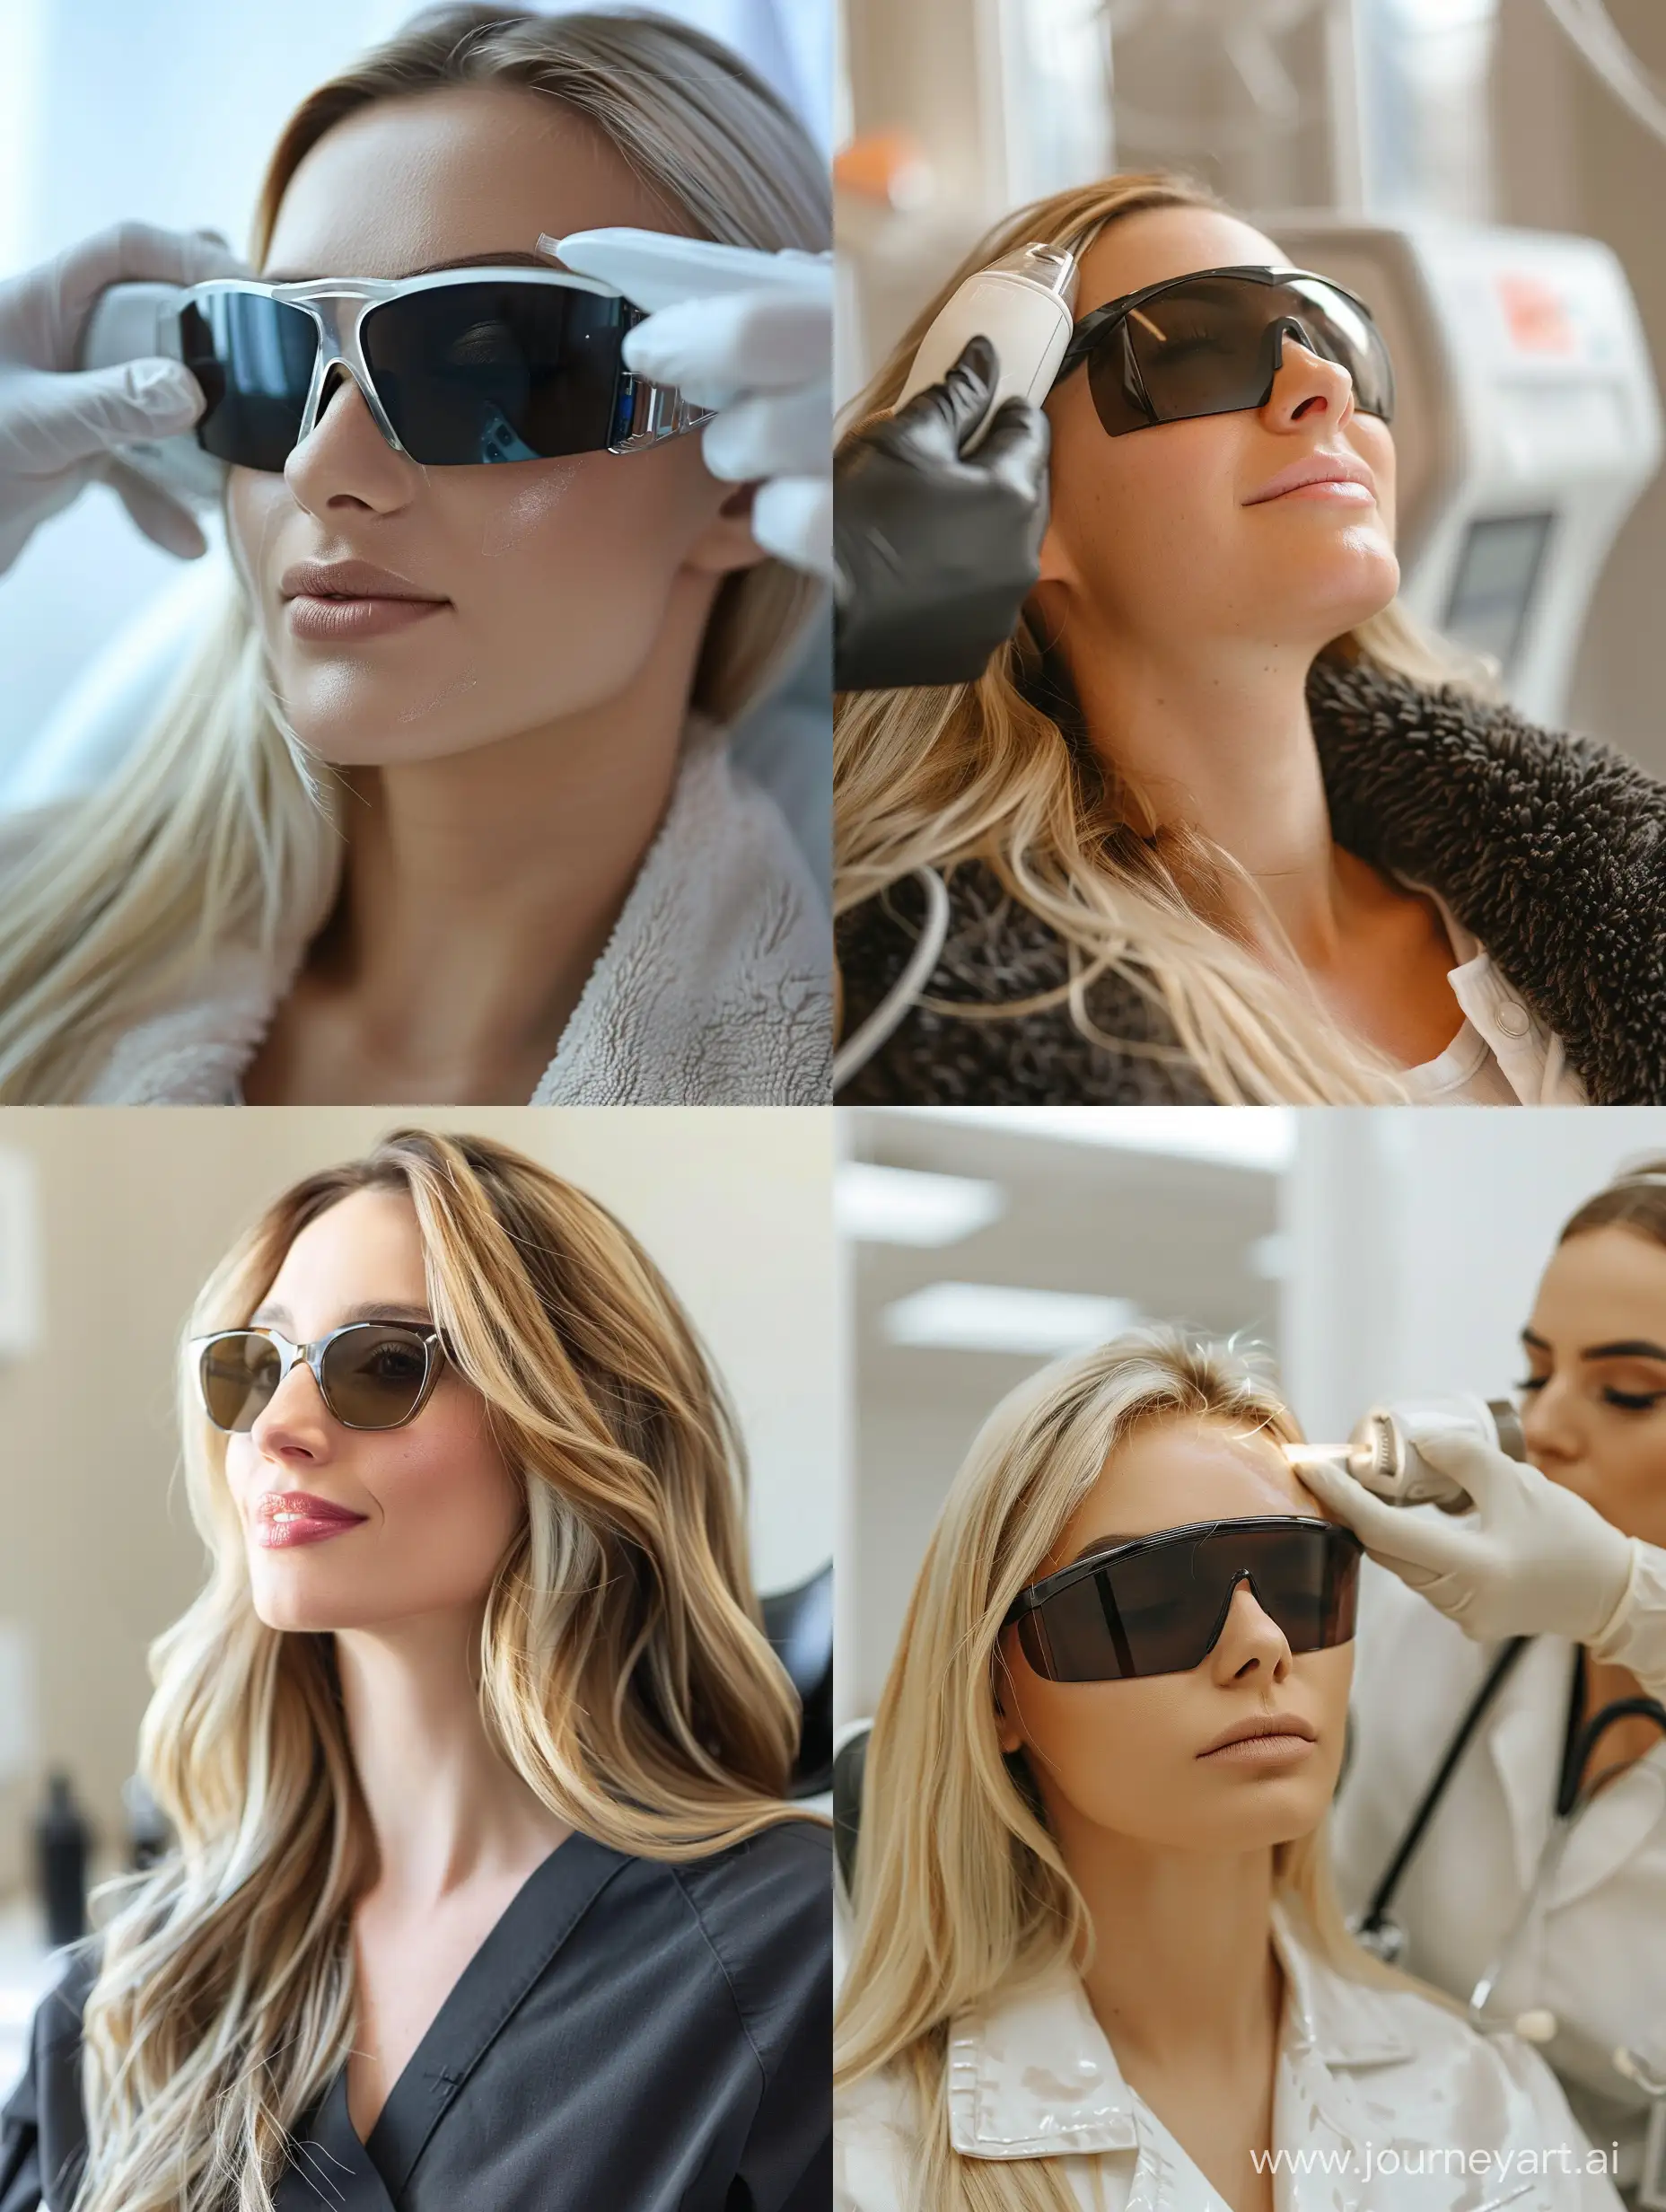 Blonde-Woman-Undergoing-Laser-Hair-Removal-Procedure-at-Cosmetologist-Appointment